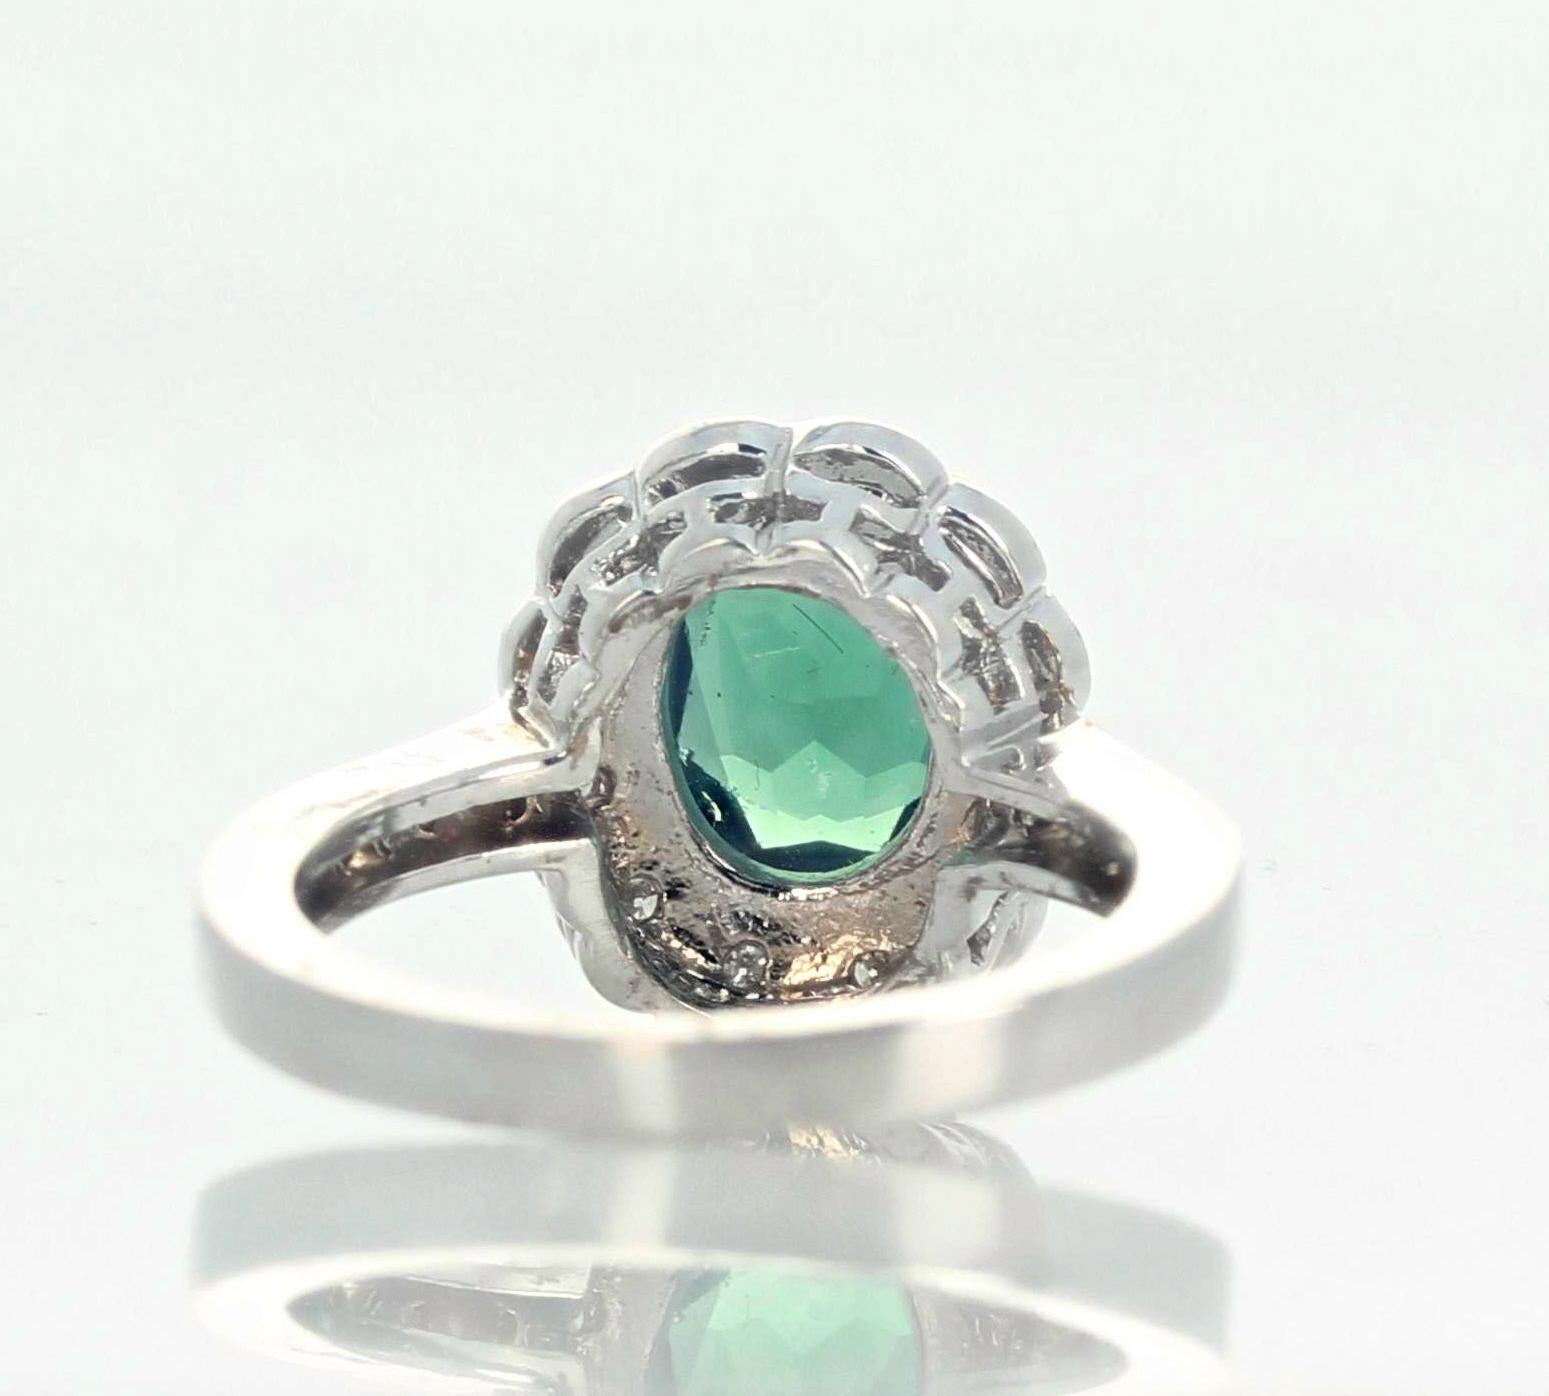 AJD Intensely Glowing 2.23 Ct Green Apatite & White Diamonds Ring For Sale 5